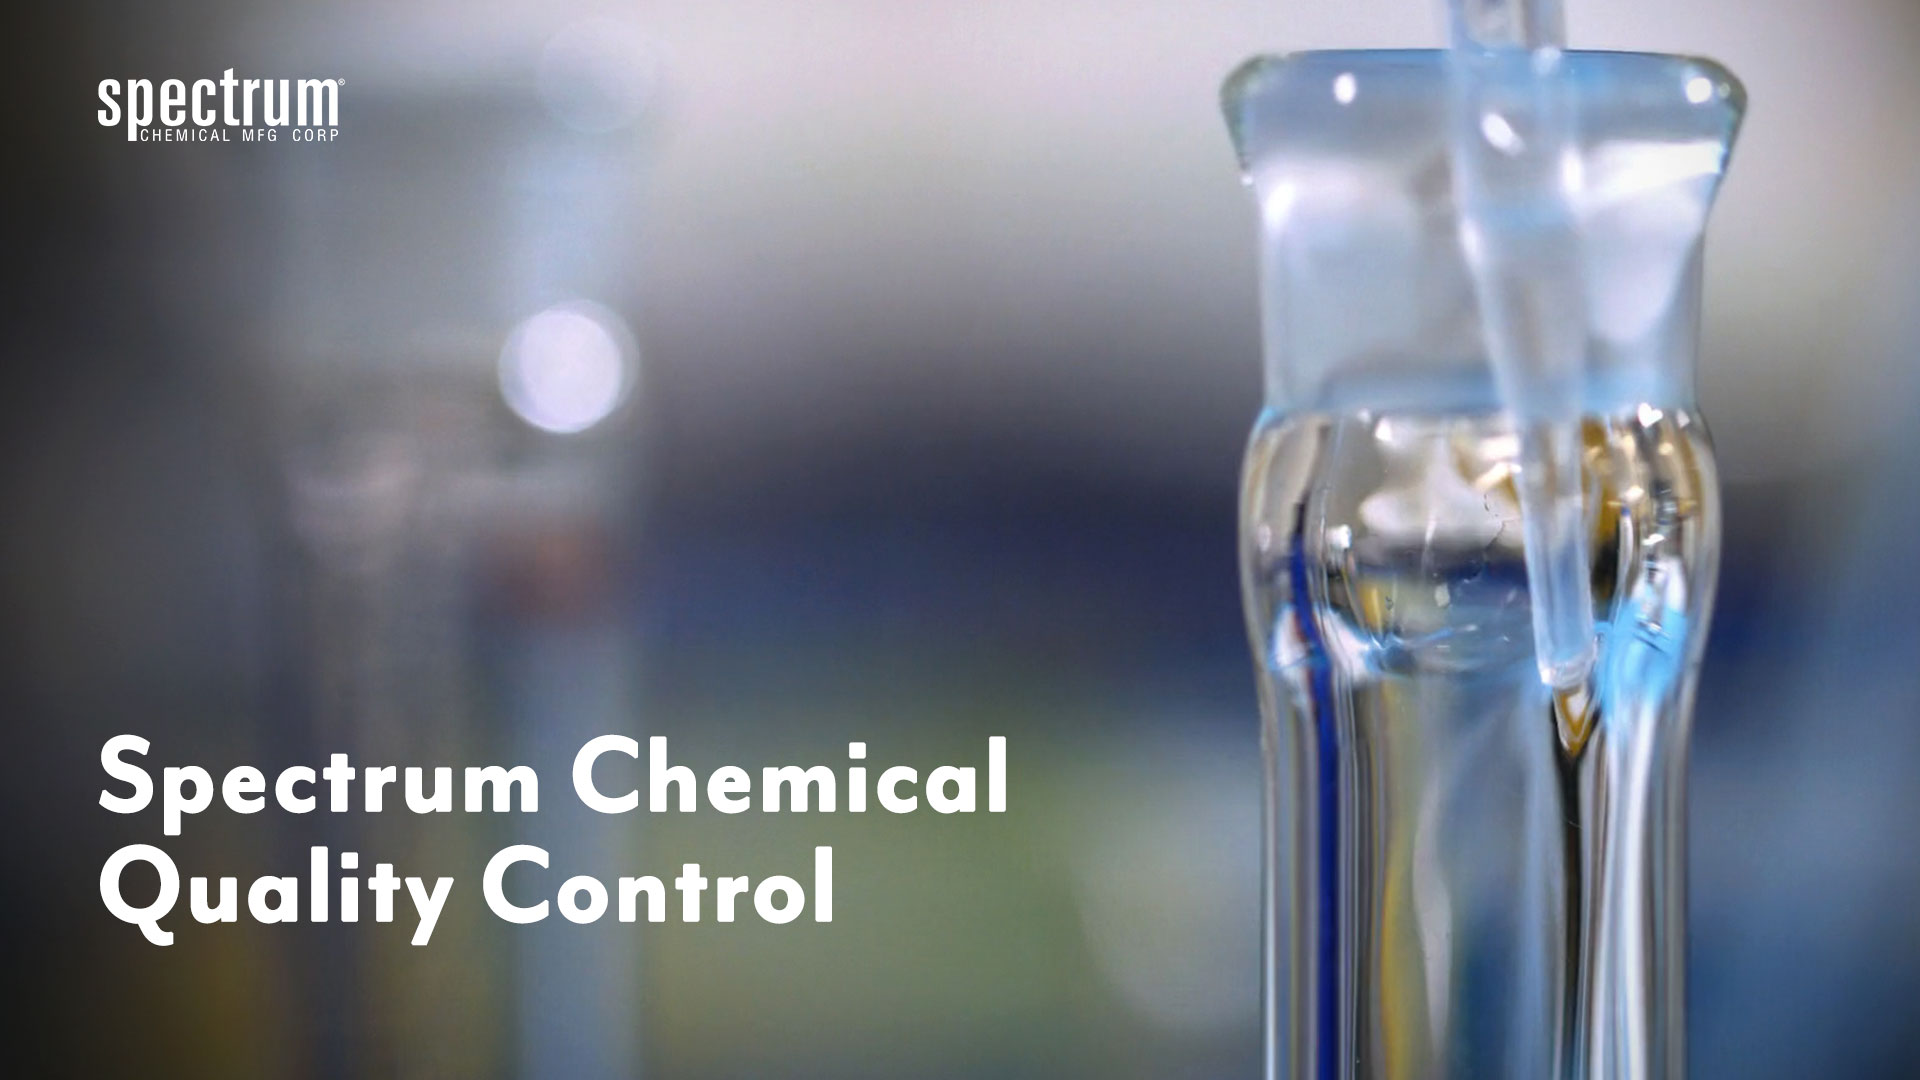 Spectrum Chemical Quality Control